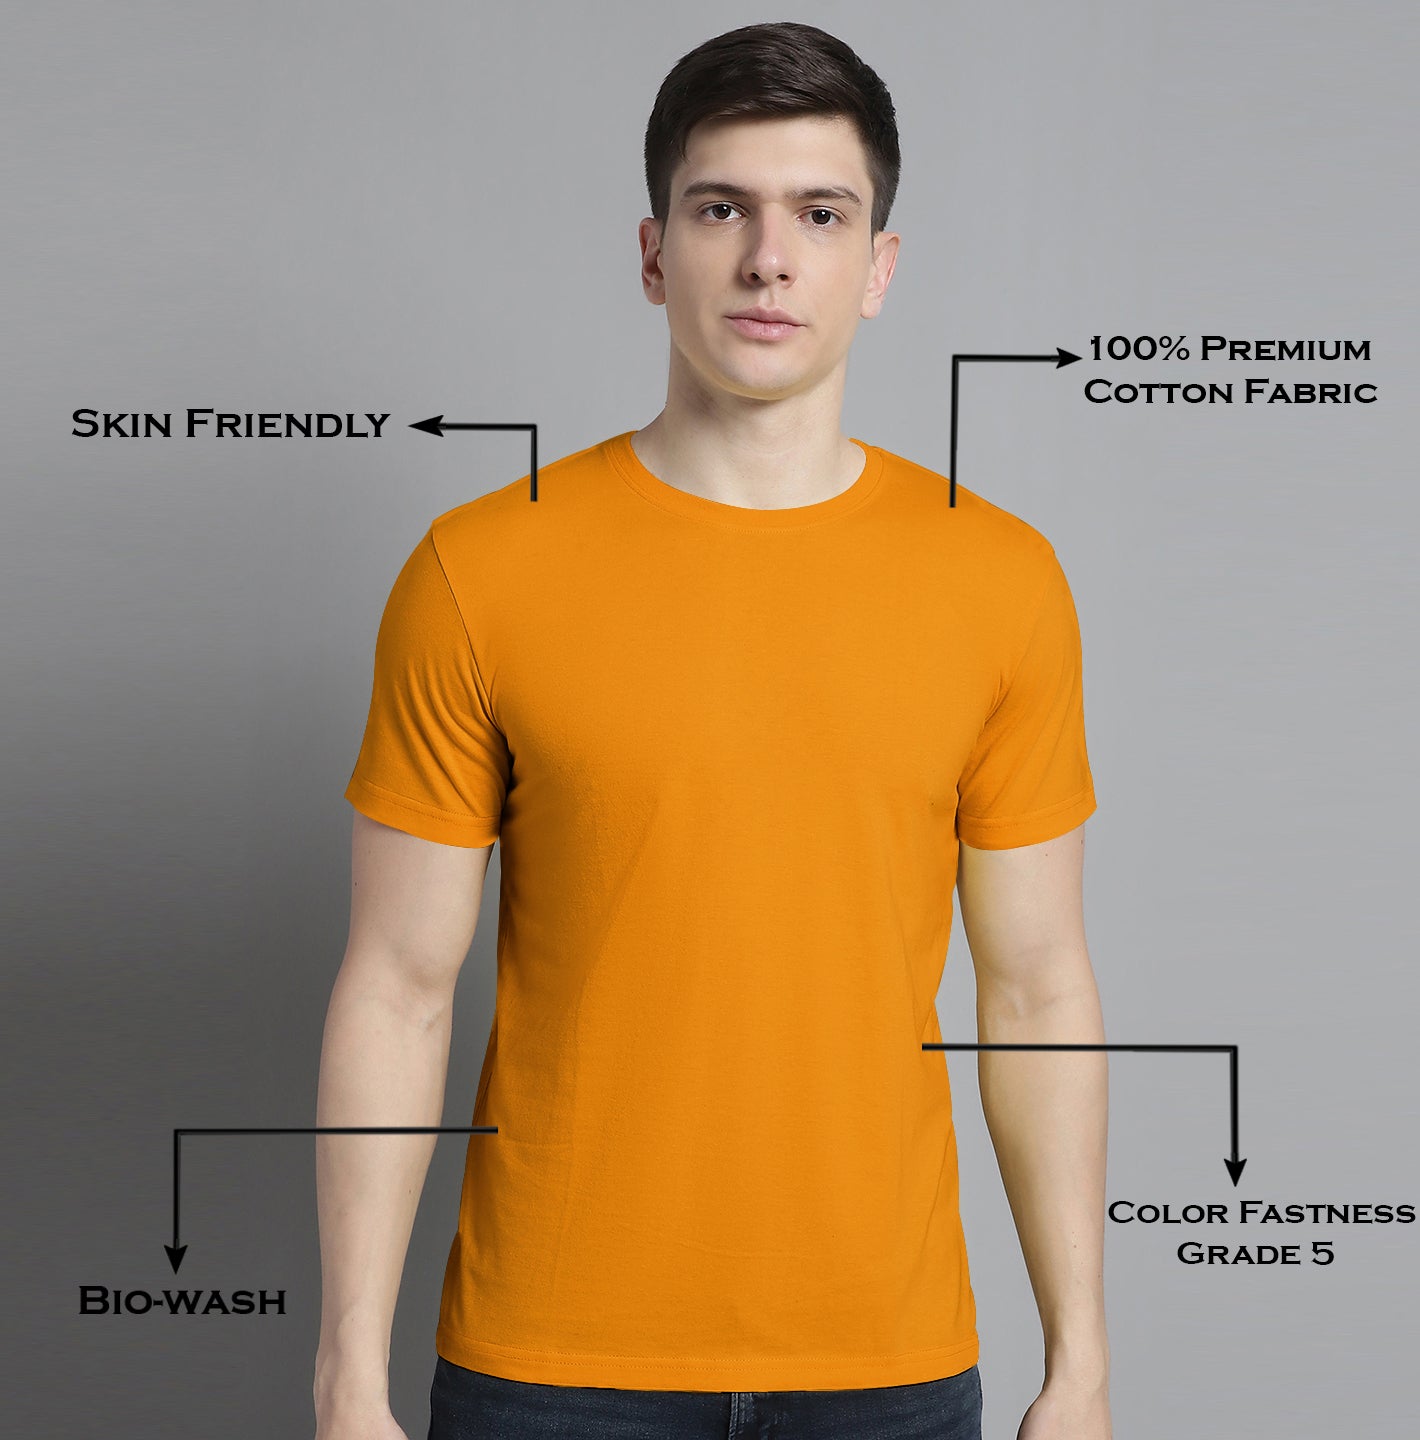 Fbar Solid Half sleeves round neck T-shirt - Friskers